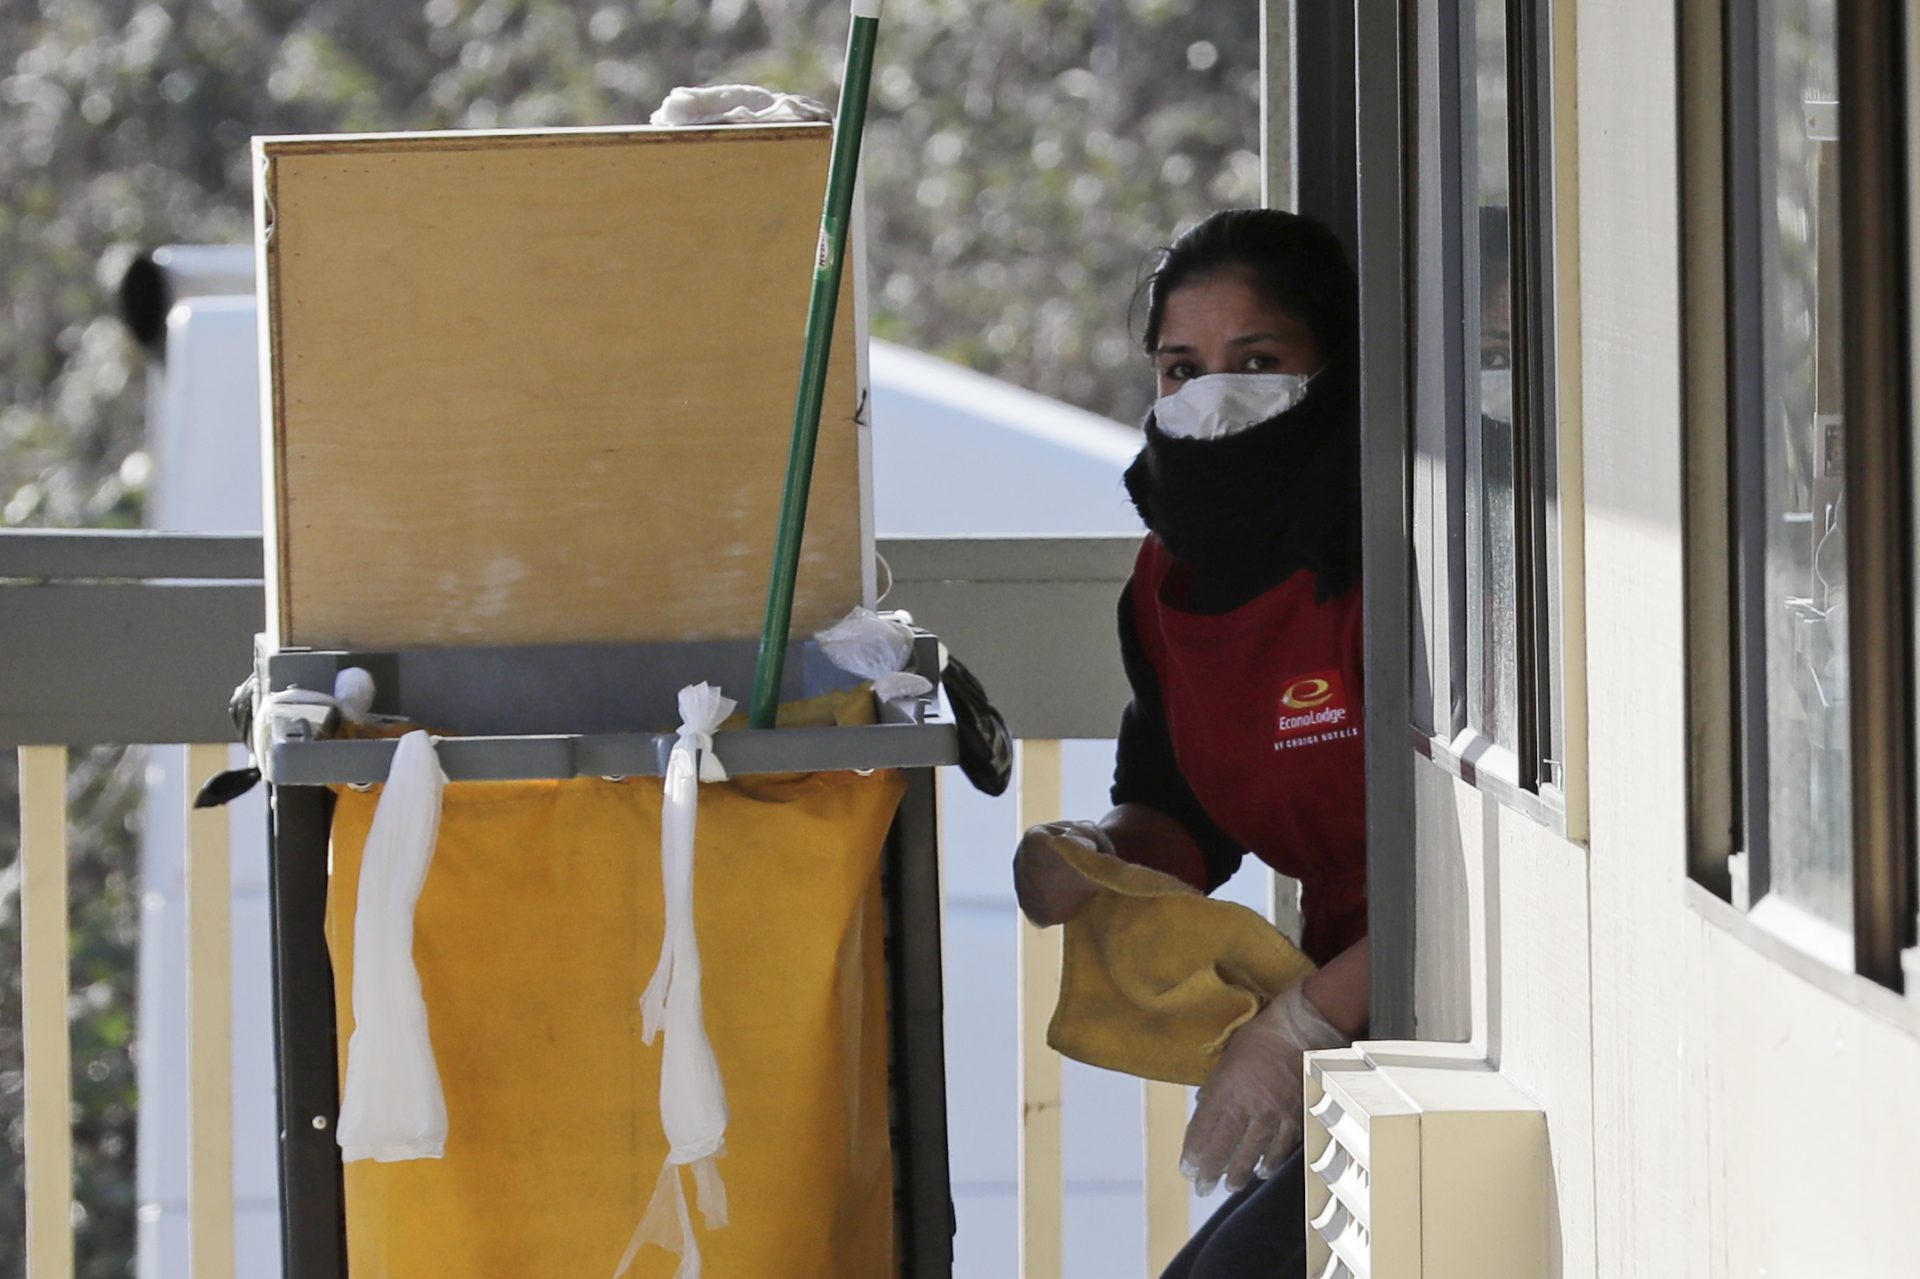 A housekeeping worker wears a mask as she cleans a room, Wednesday, March 4, 2020, at an Econo Lodge motel in Kent, Wash. King County Executive Dow Constantine said Wednesday that the county had purchased the 85-bed motel south of Seattle to house patients for recovery and isolation due to the COVID-19 coronavirus.